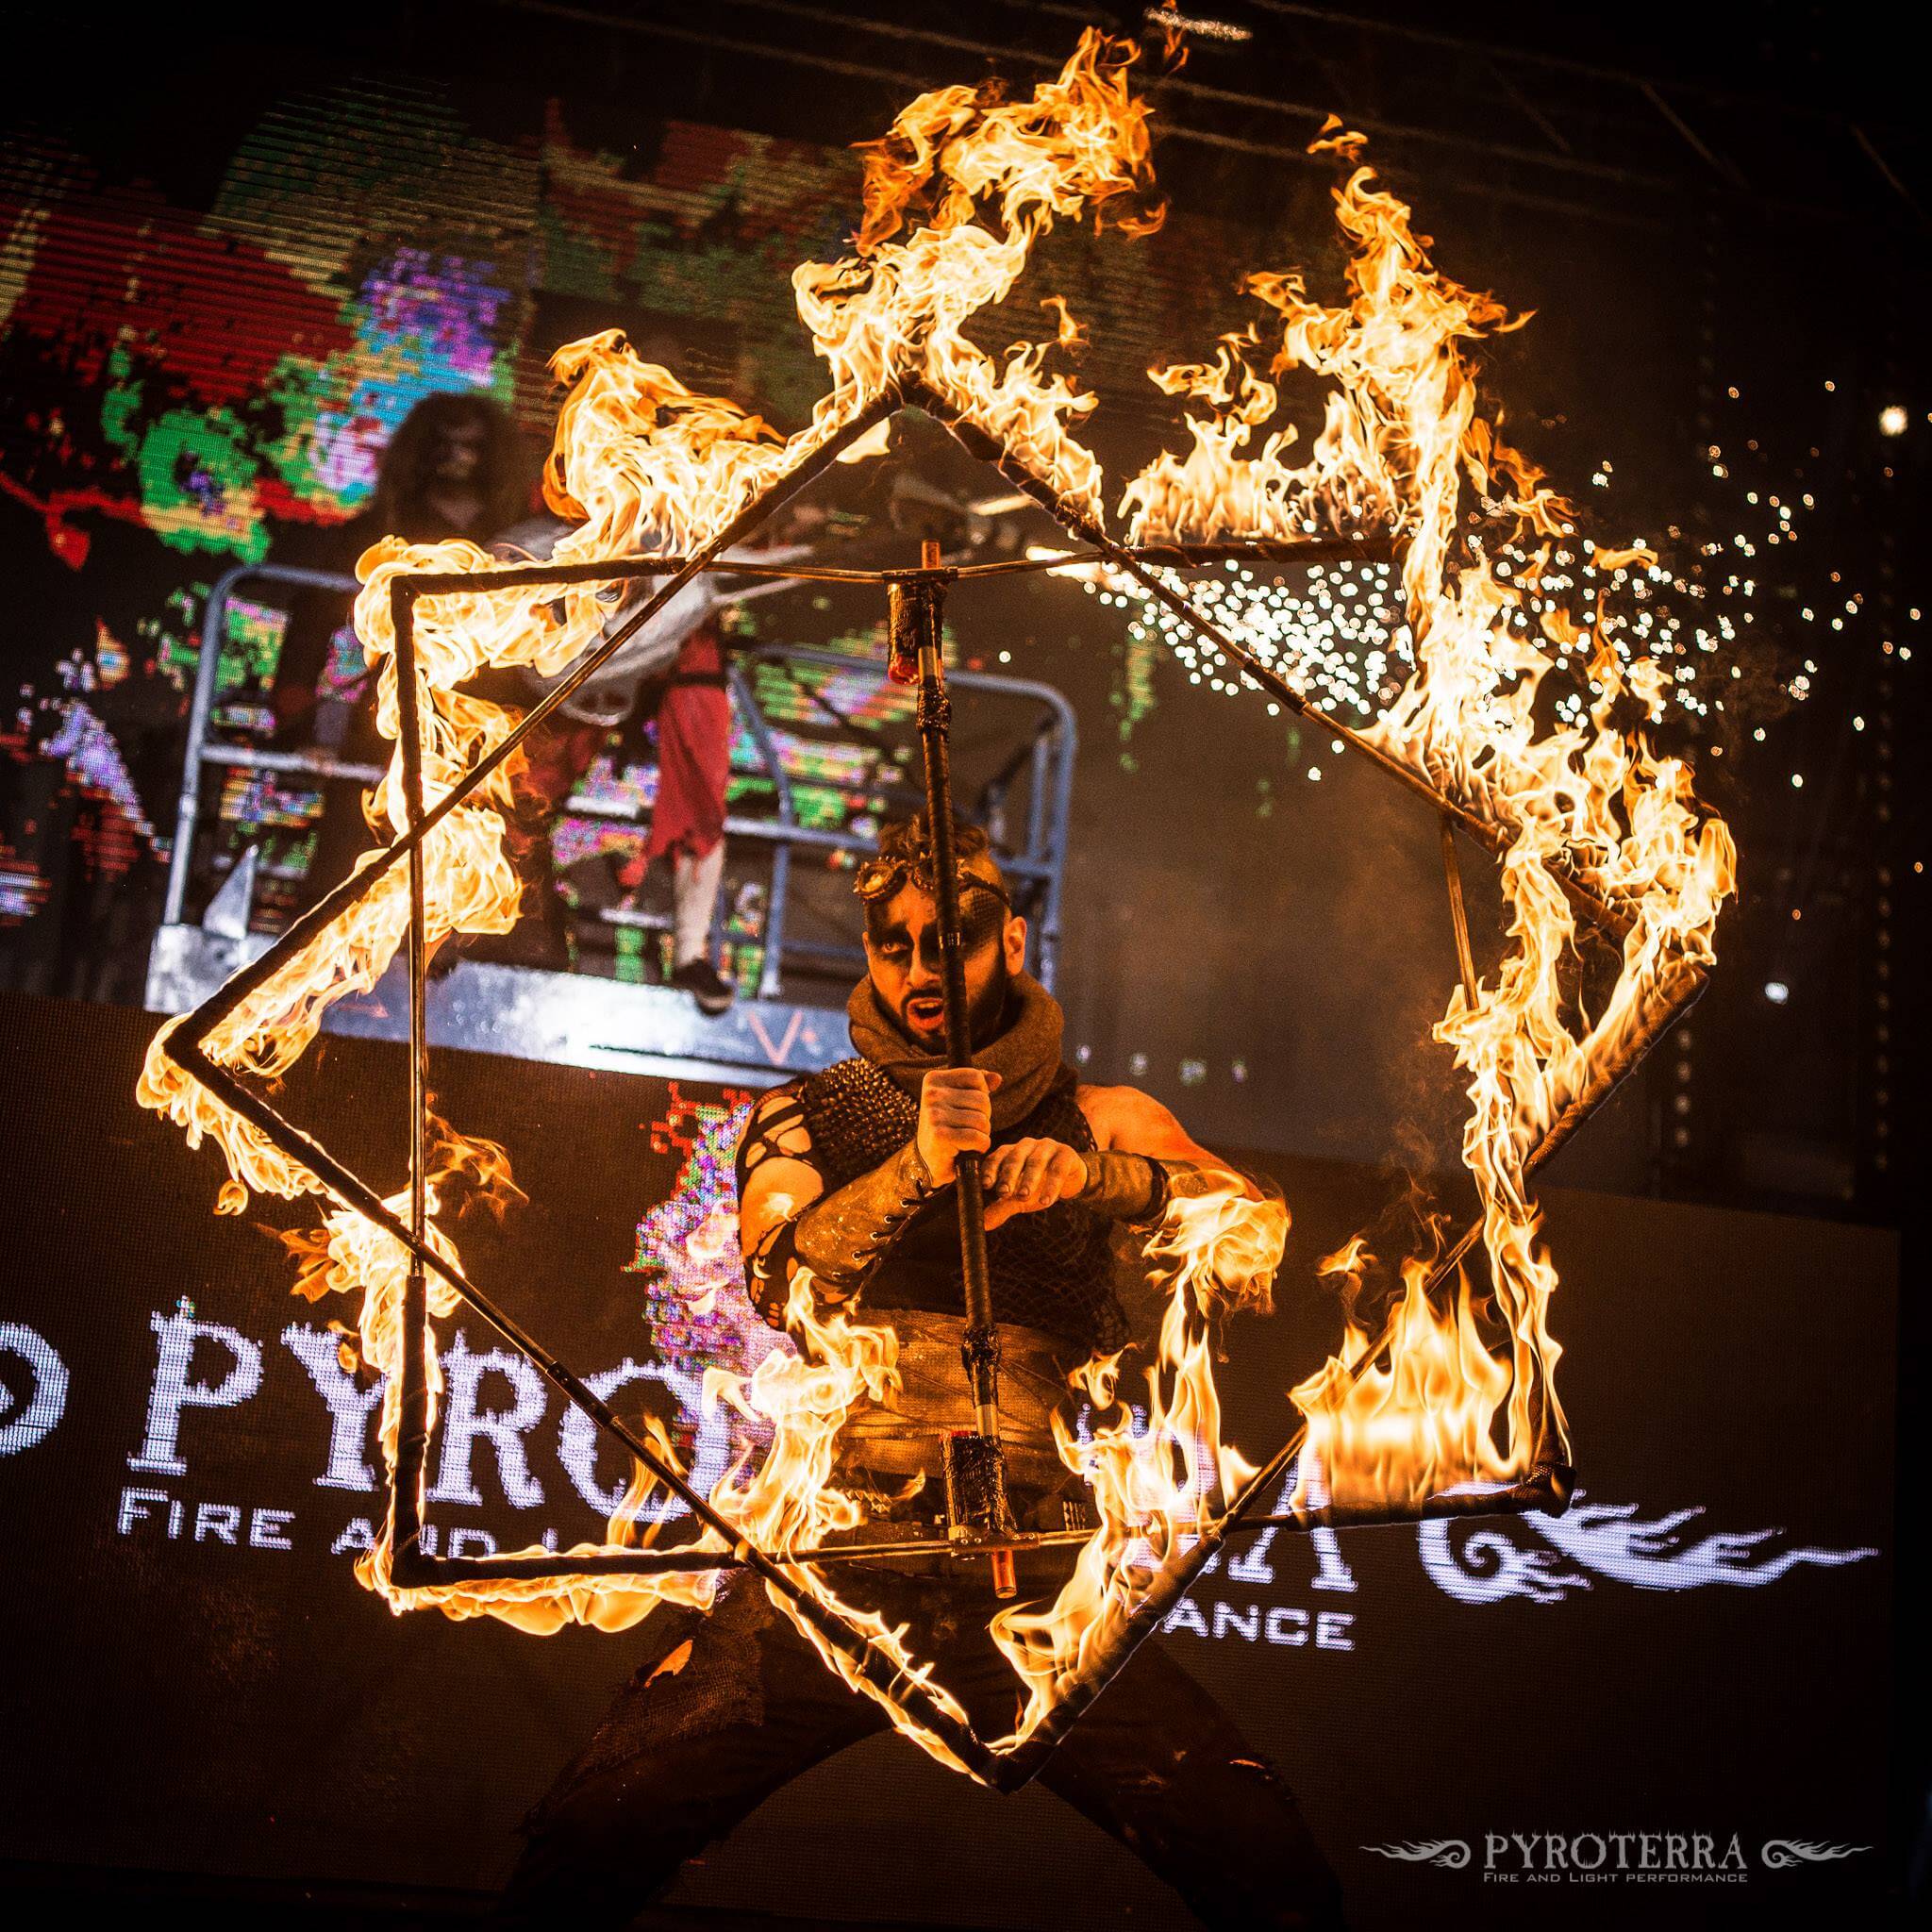 Pyroterra_fire special effect, halloween show